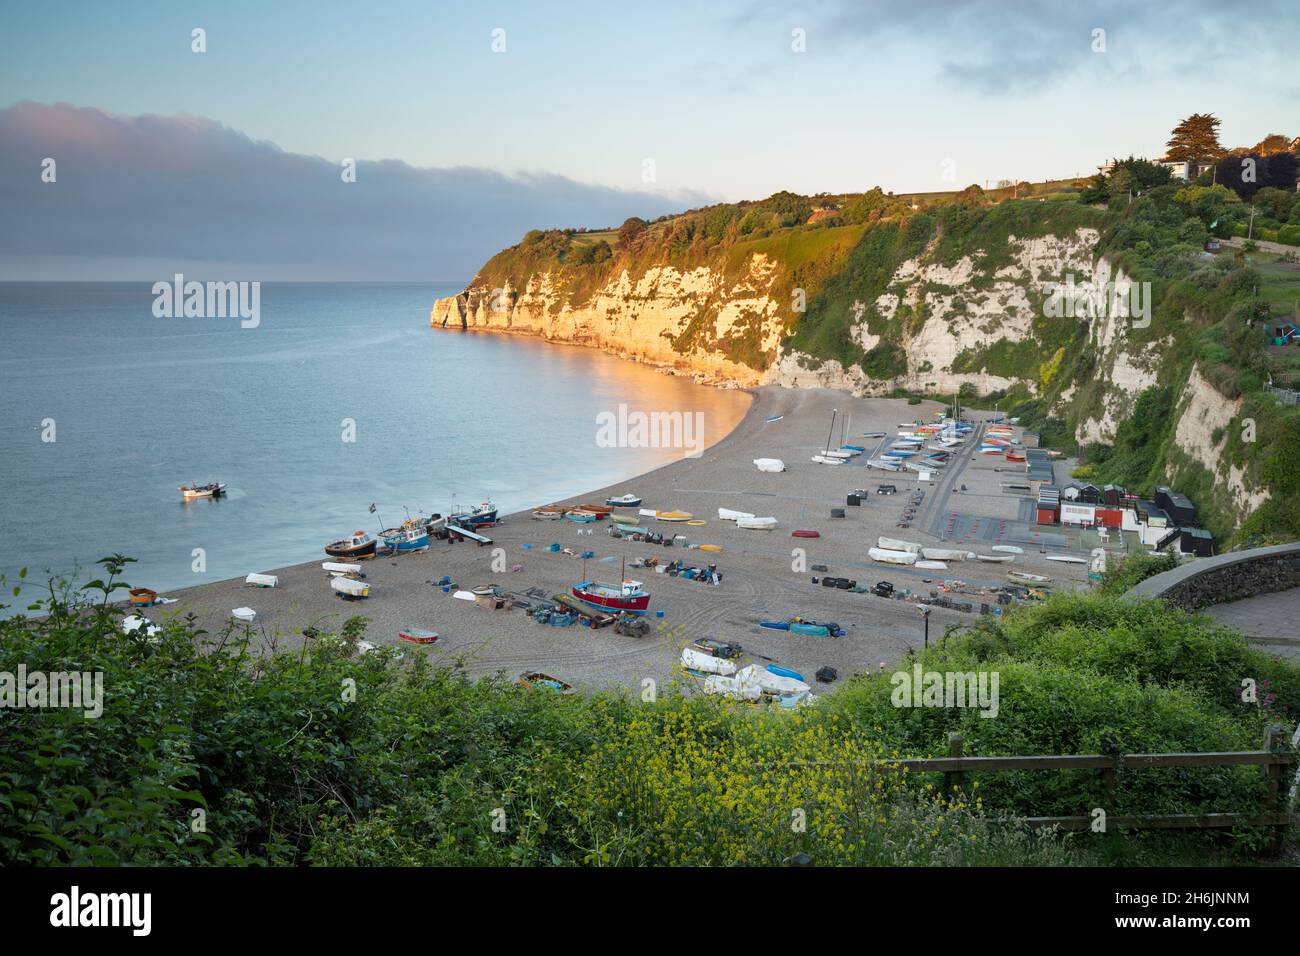 View over Beer beach and cliffs at sunrise, Beer, Jurassic Coast, UNESCO World Heritage Site, Devon, England, United Kingdom, Europe Stock Photo